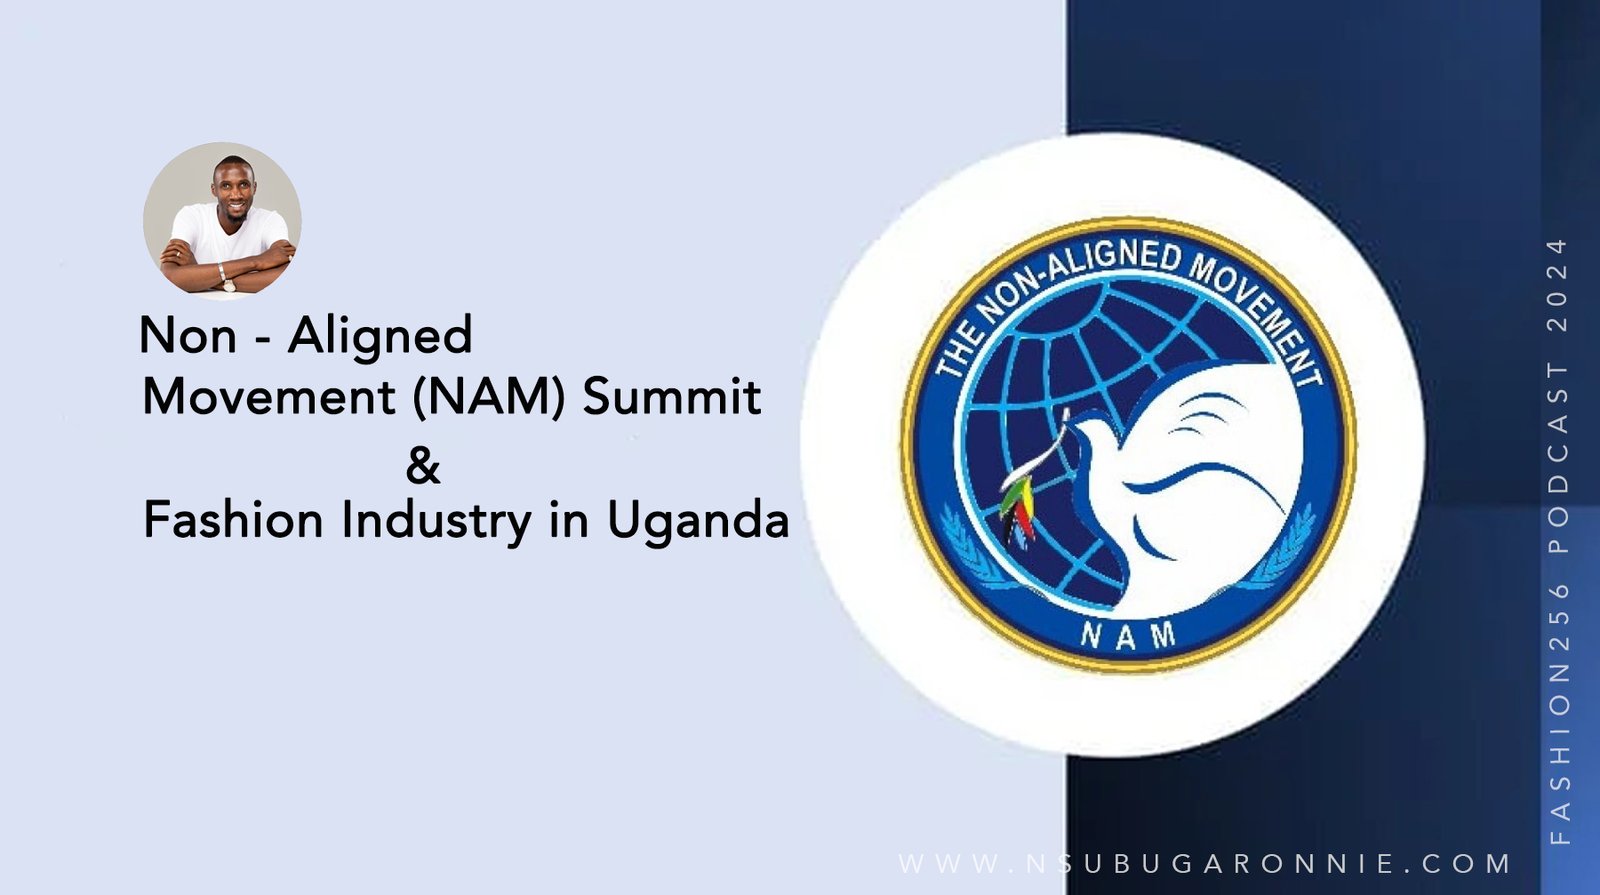 The Impact of the Non-Aligned Movement Summit on the Fashion Industry in Uganda